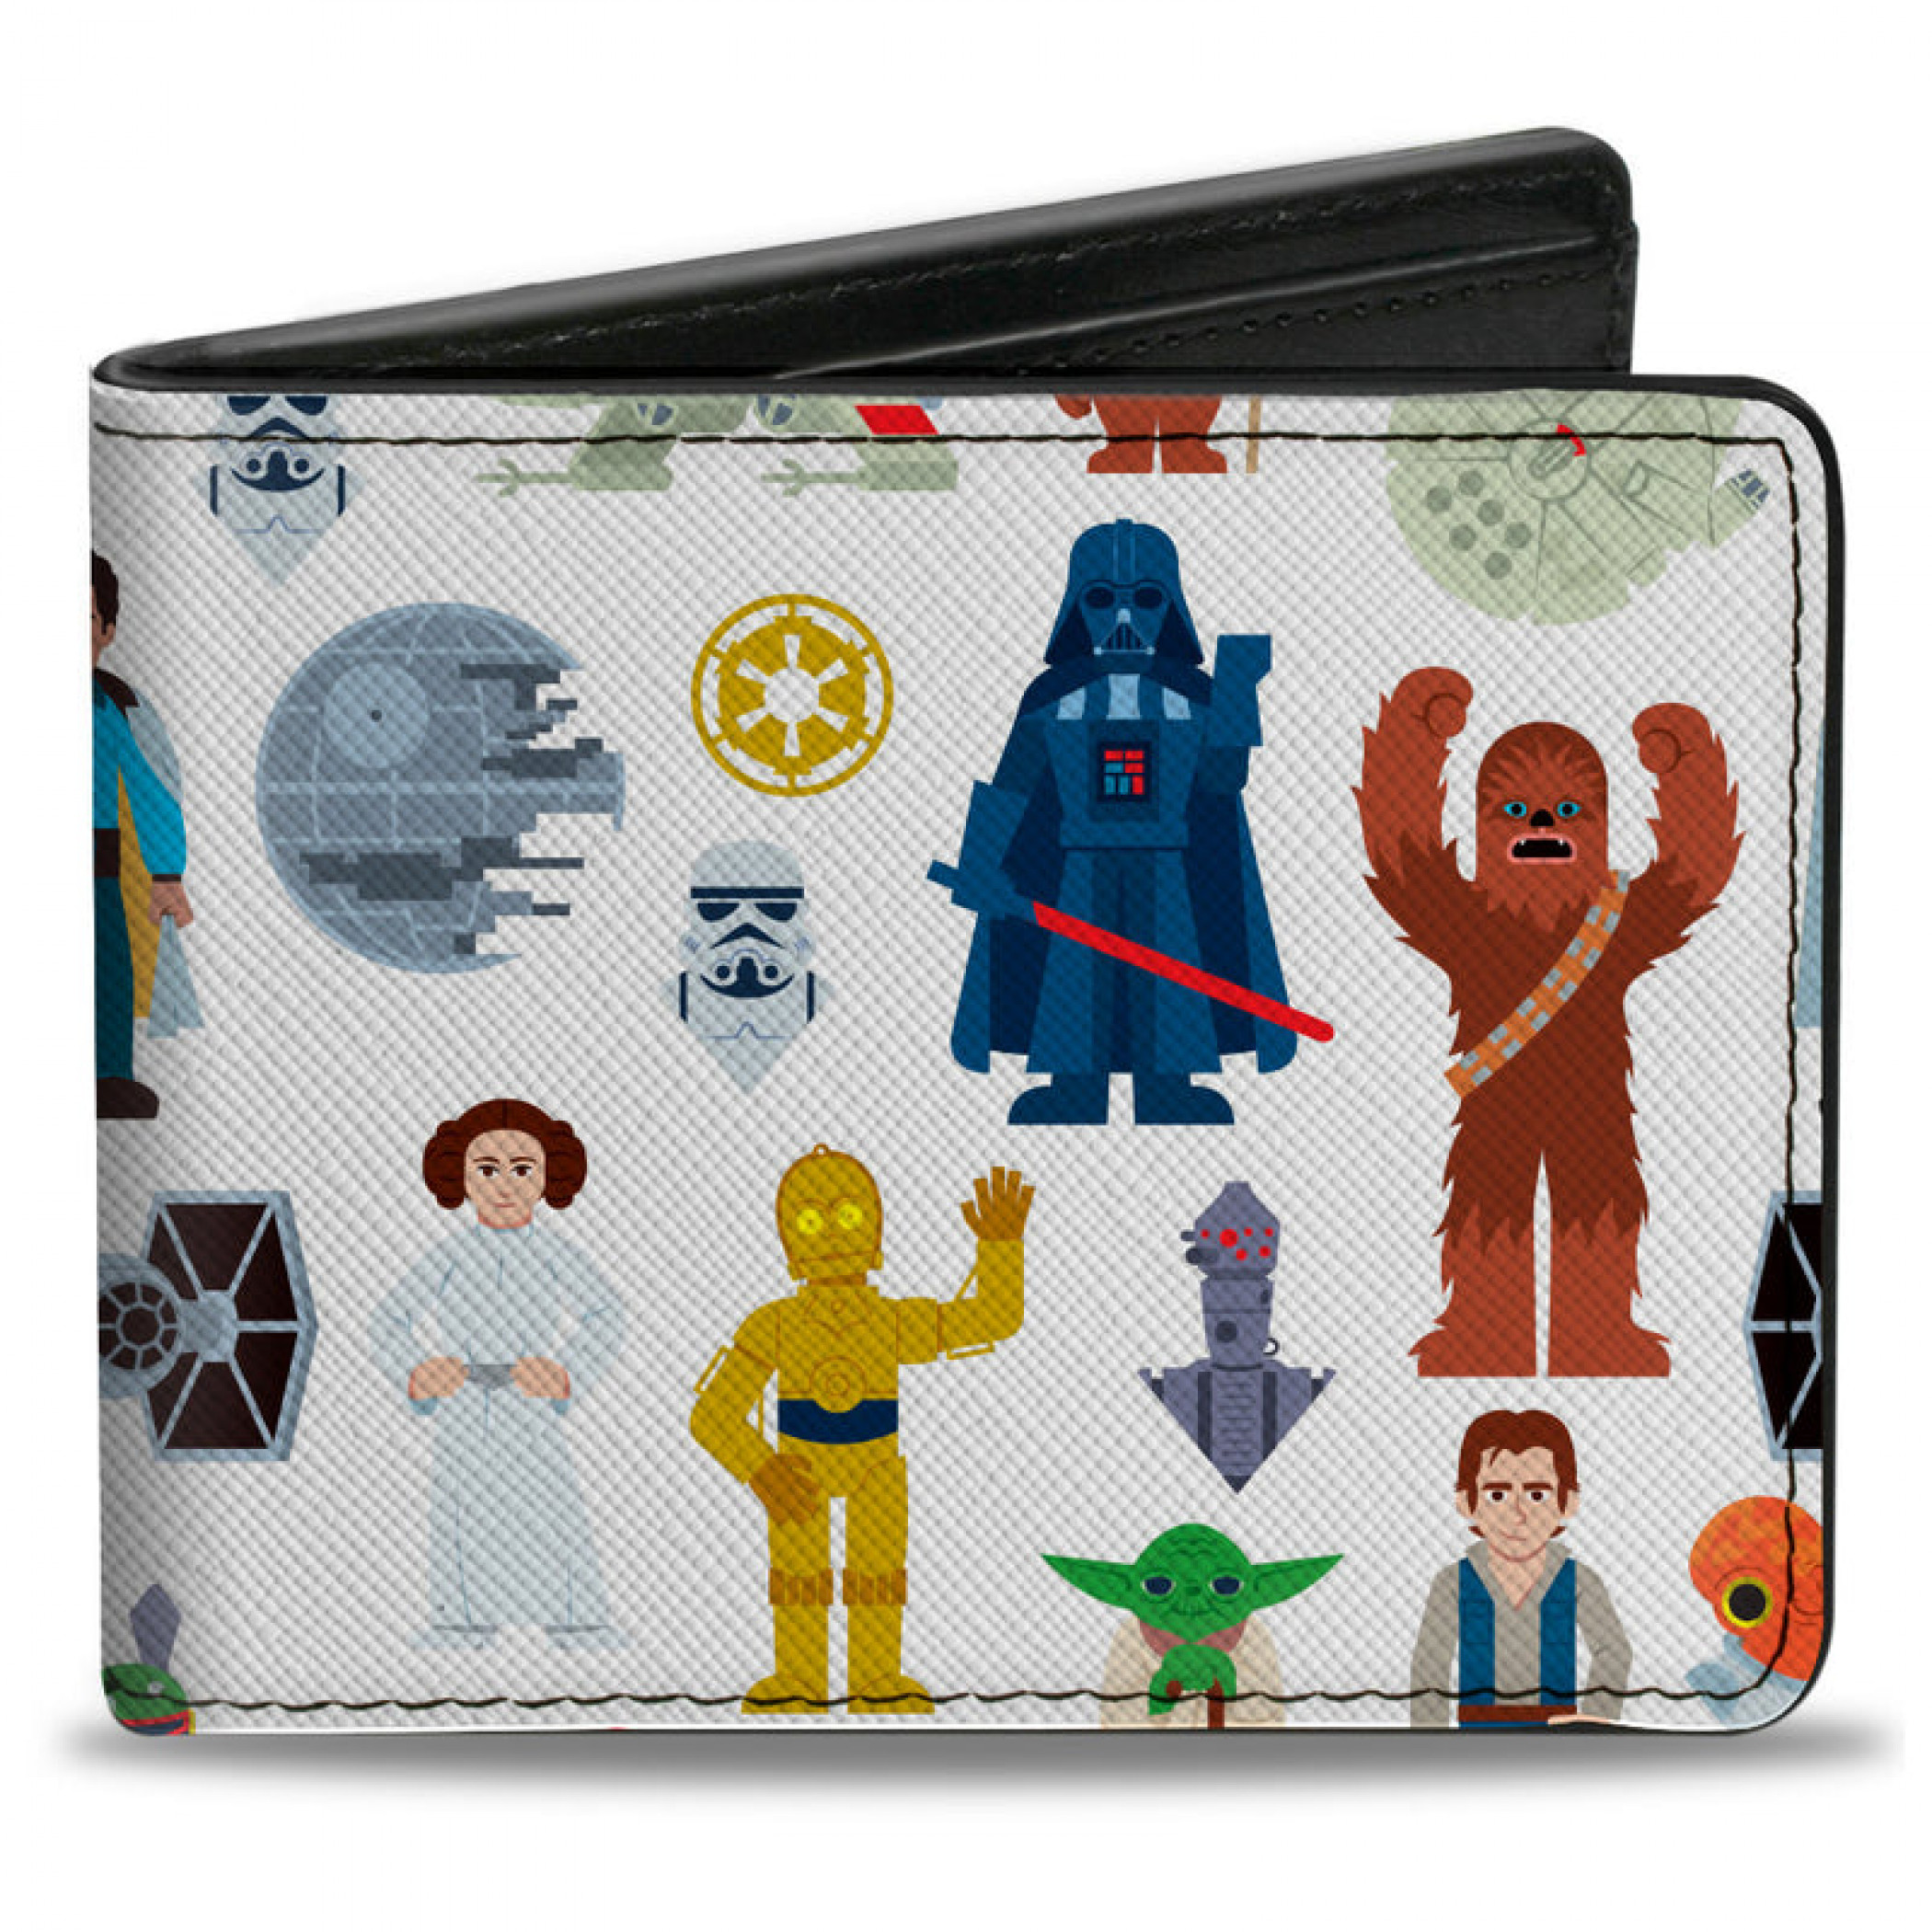 Star Wars Classic Characters and Icons Collage Bi-Fold Wallet